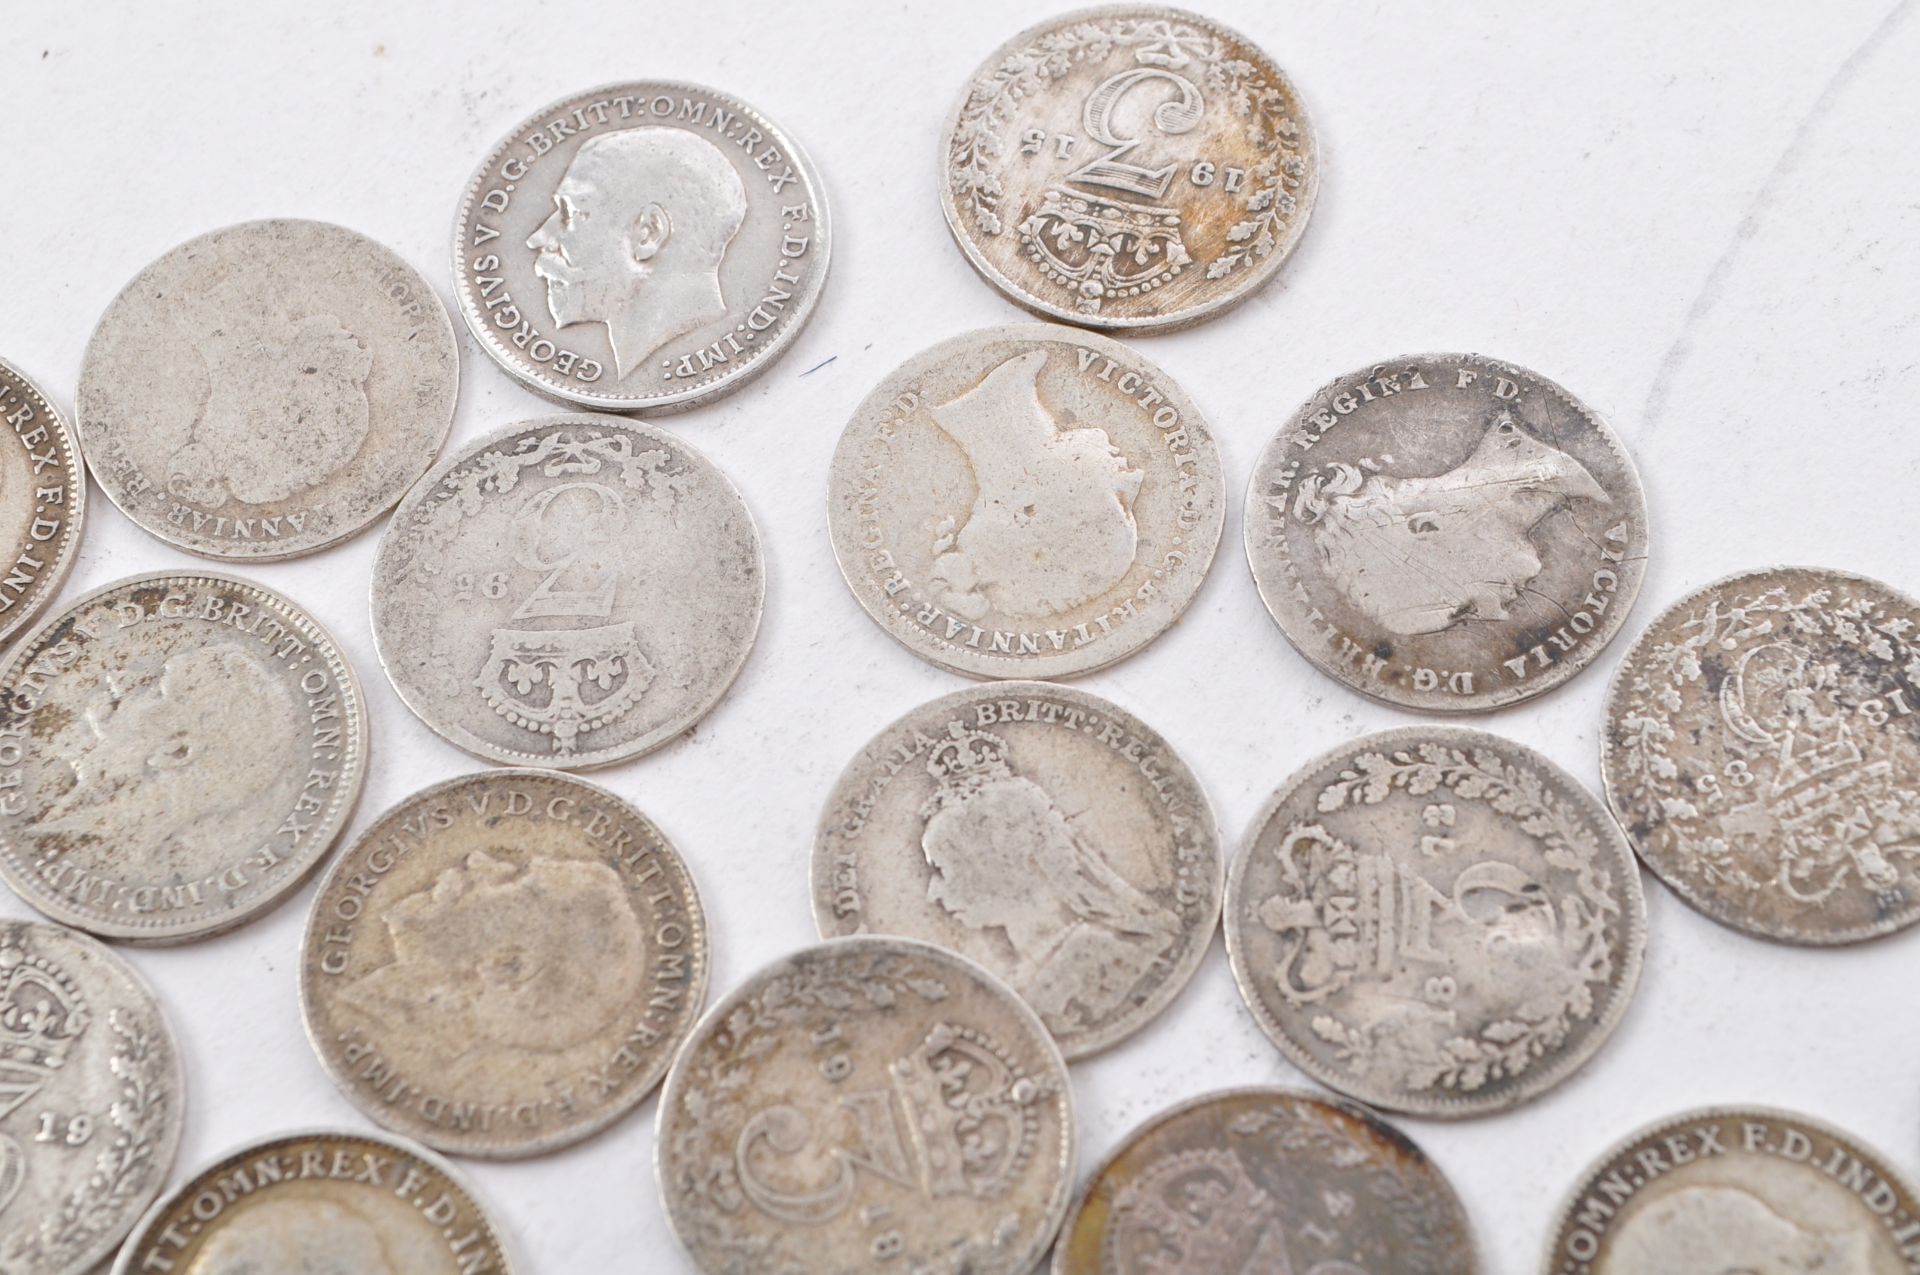 COLLECTION OF 19TH AND 20TH CENTURY SILVER THREE PENCE COINS - Image 5 of 9